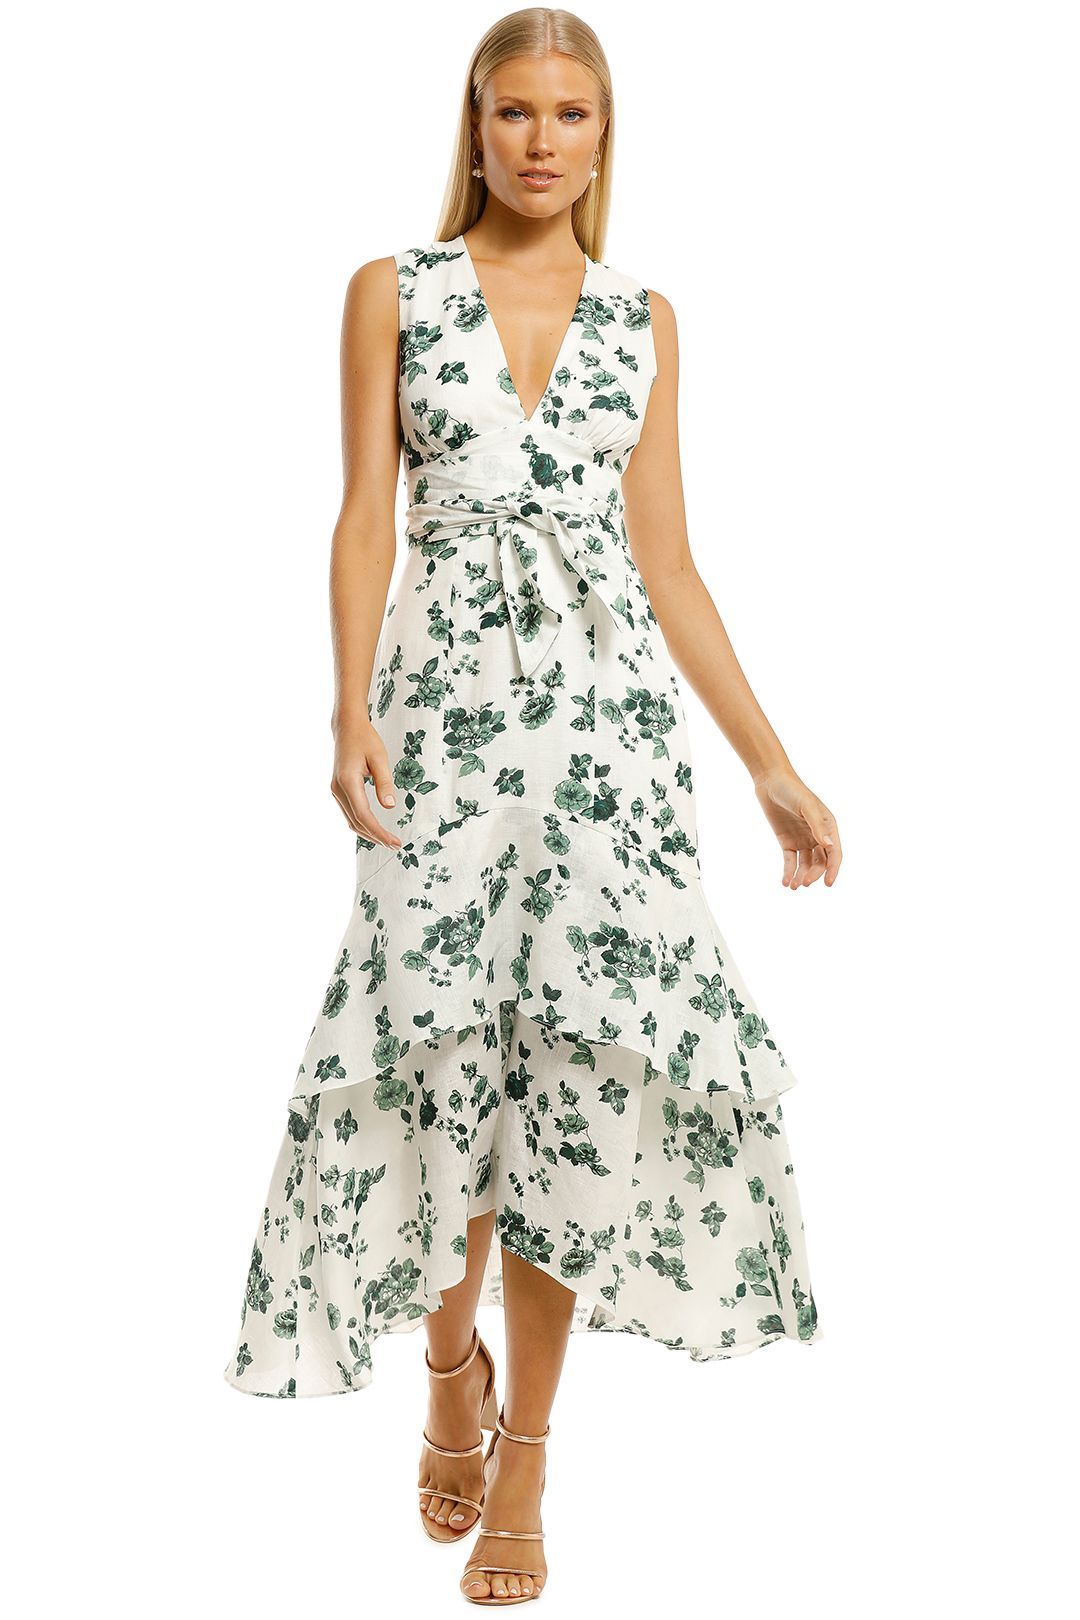 Keepsake-the-Label-Fallen-Dress-Ivory-with-Jade-Floral-Front